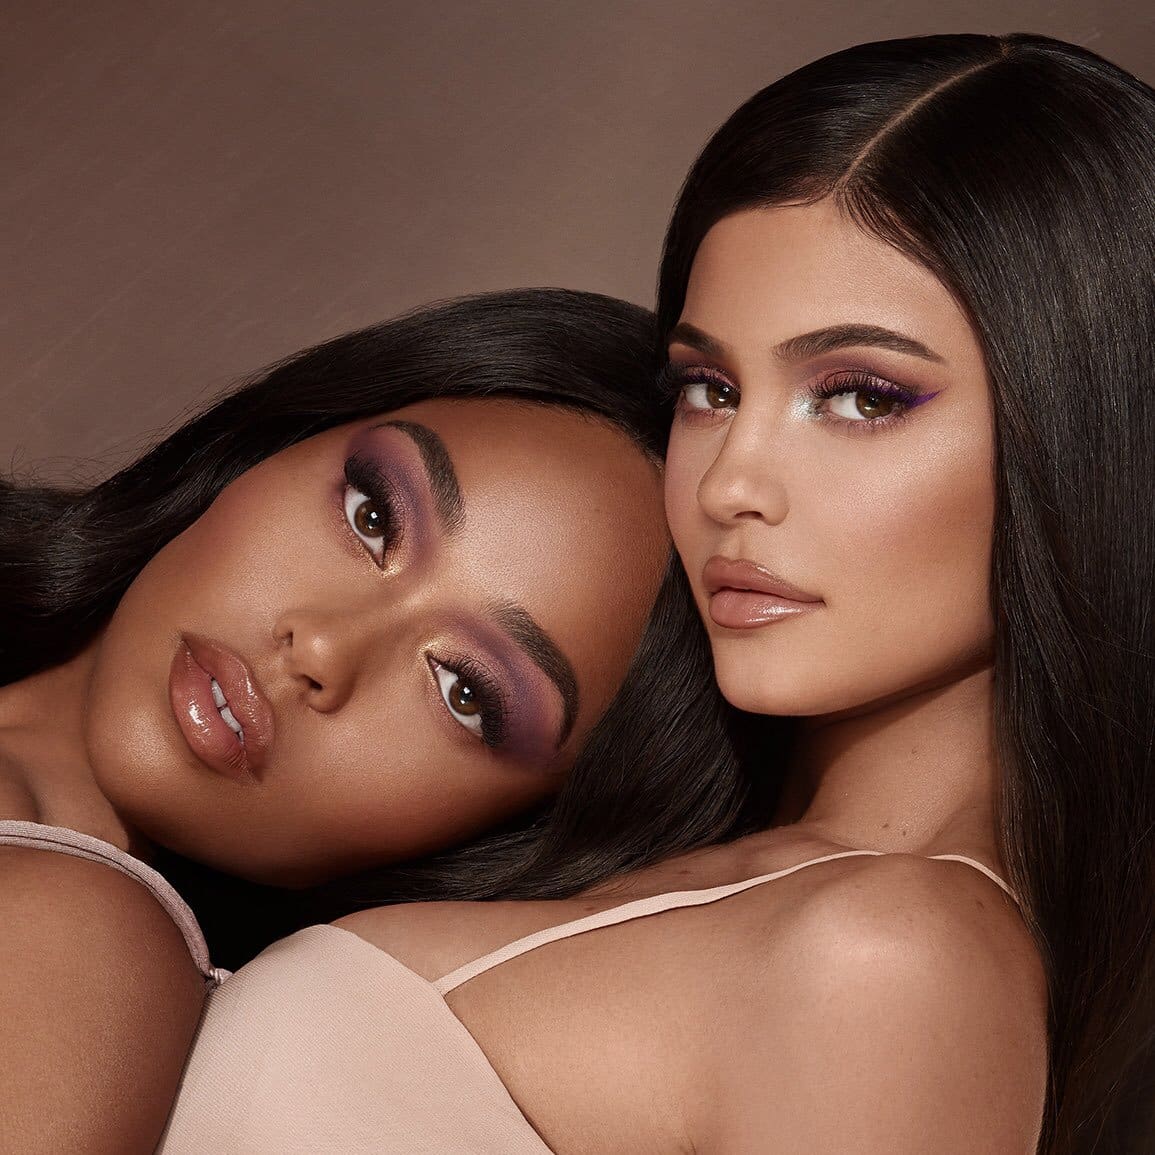 Jordyn Woods Shows Off A Piece Of Jewelry And Haters Say She's Copying Kylie Jenner